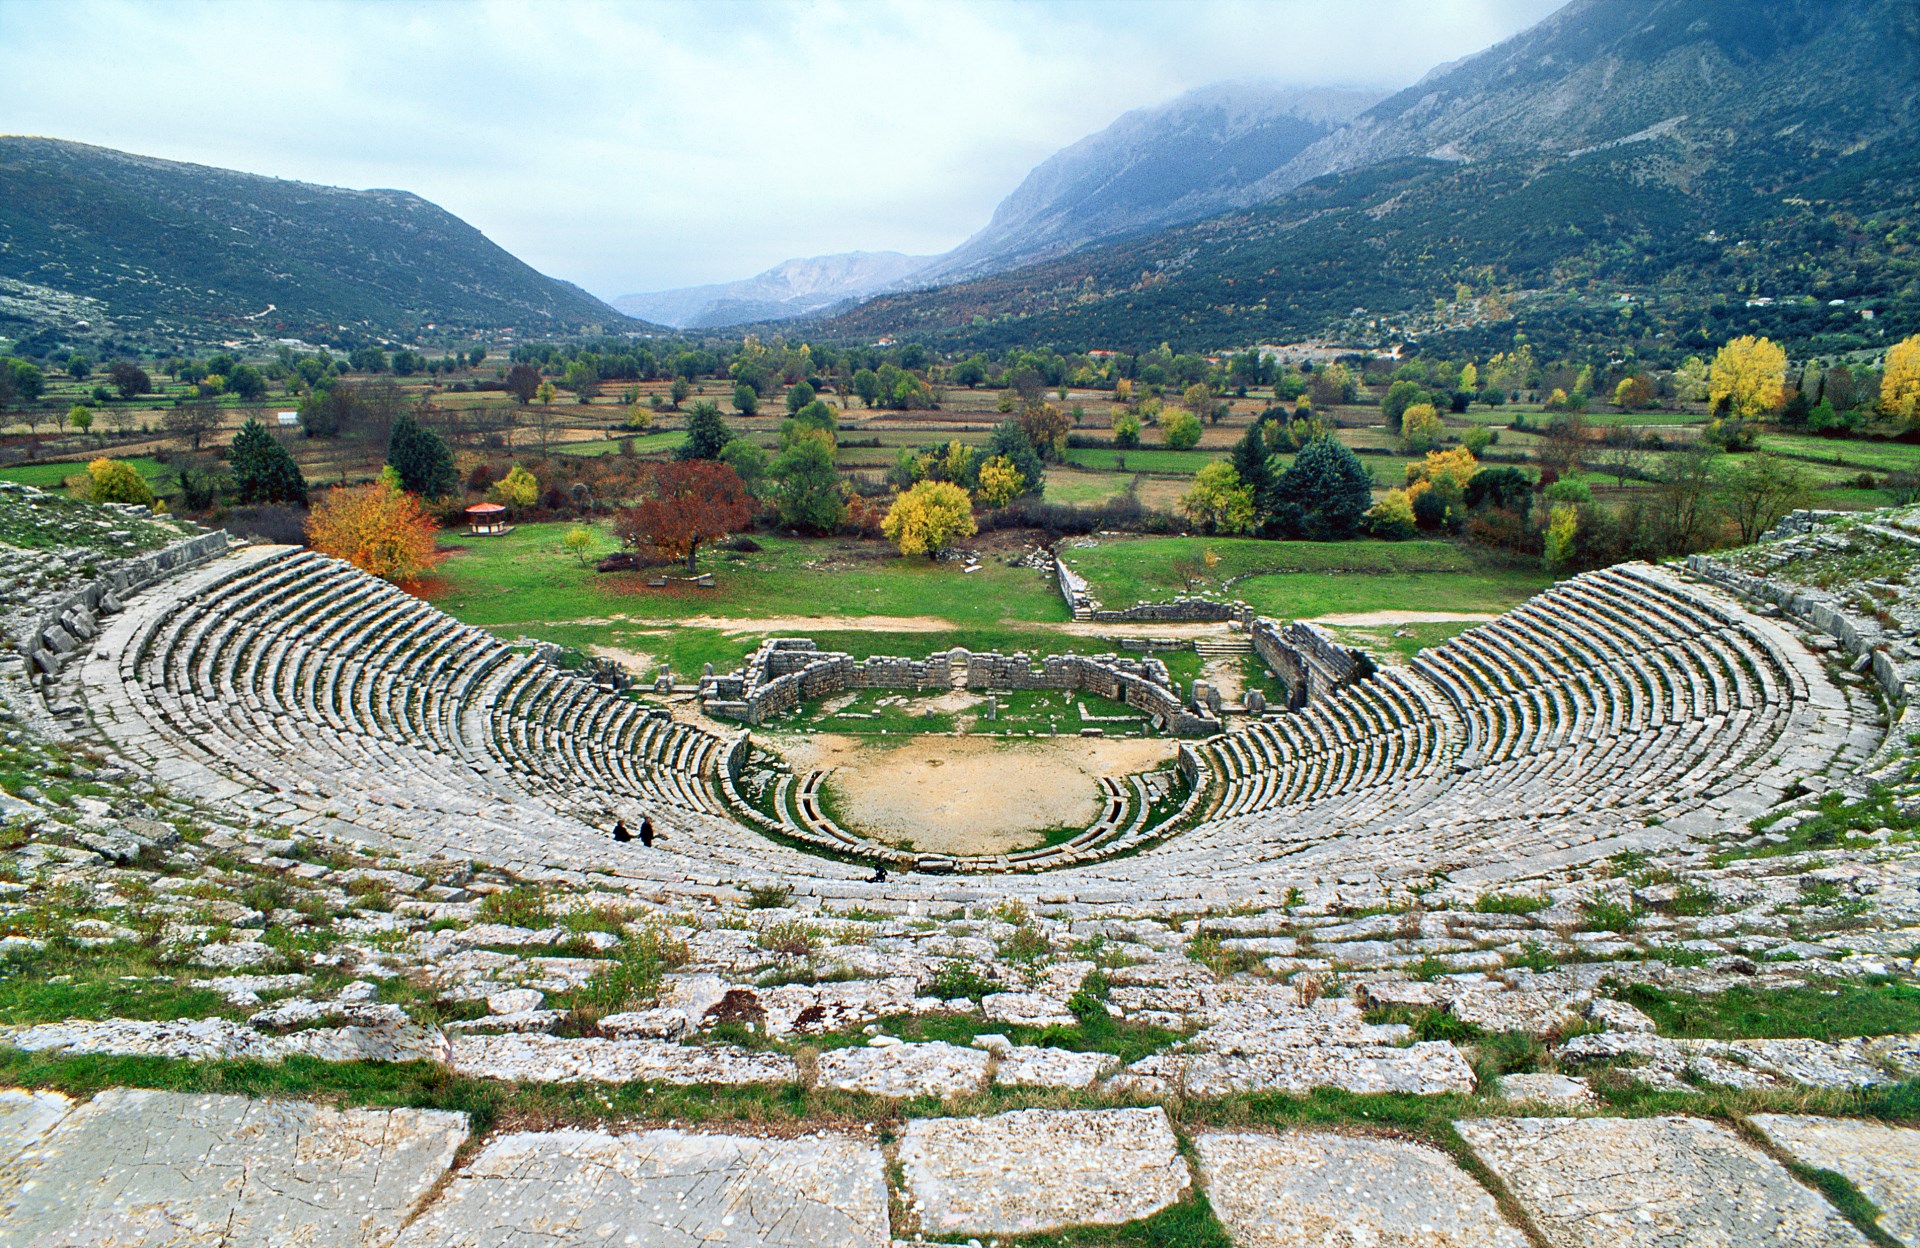 Fascinating archaeological sites to see from the Greek Islands